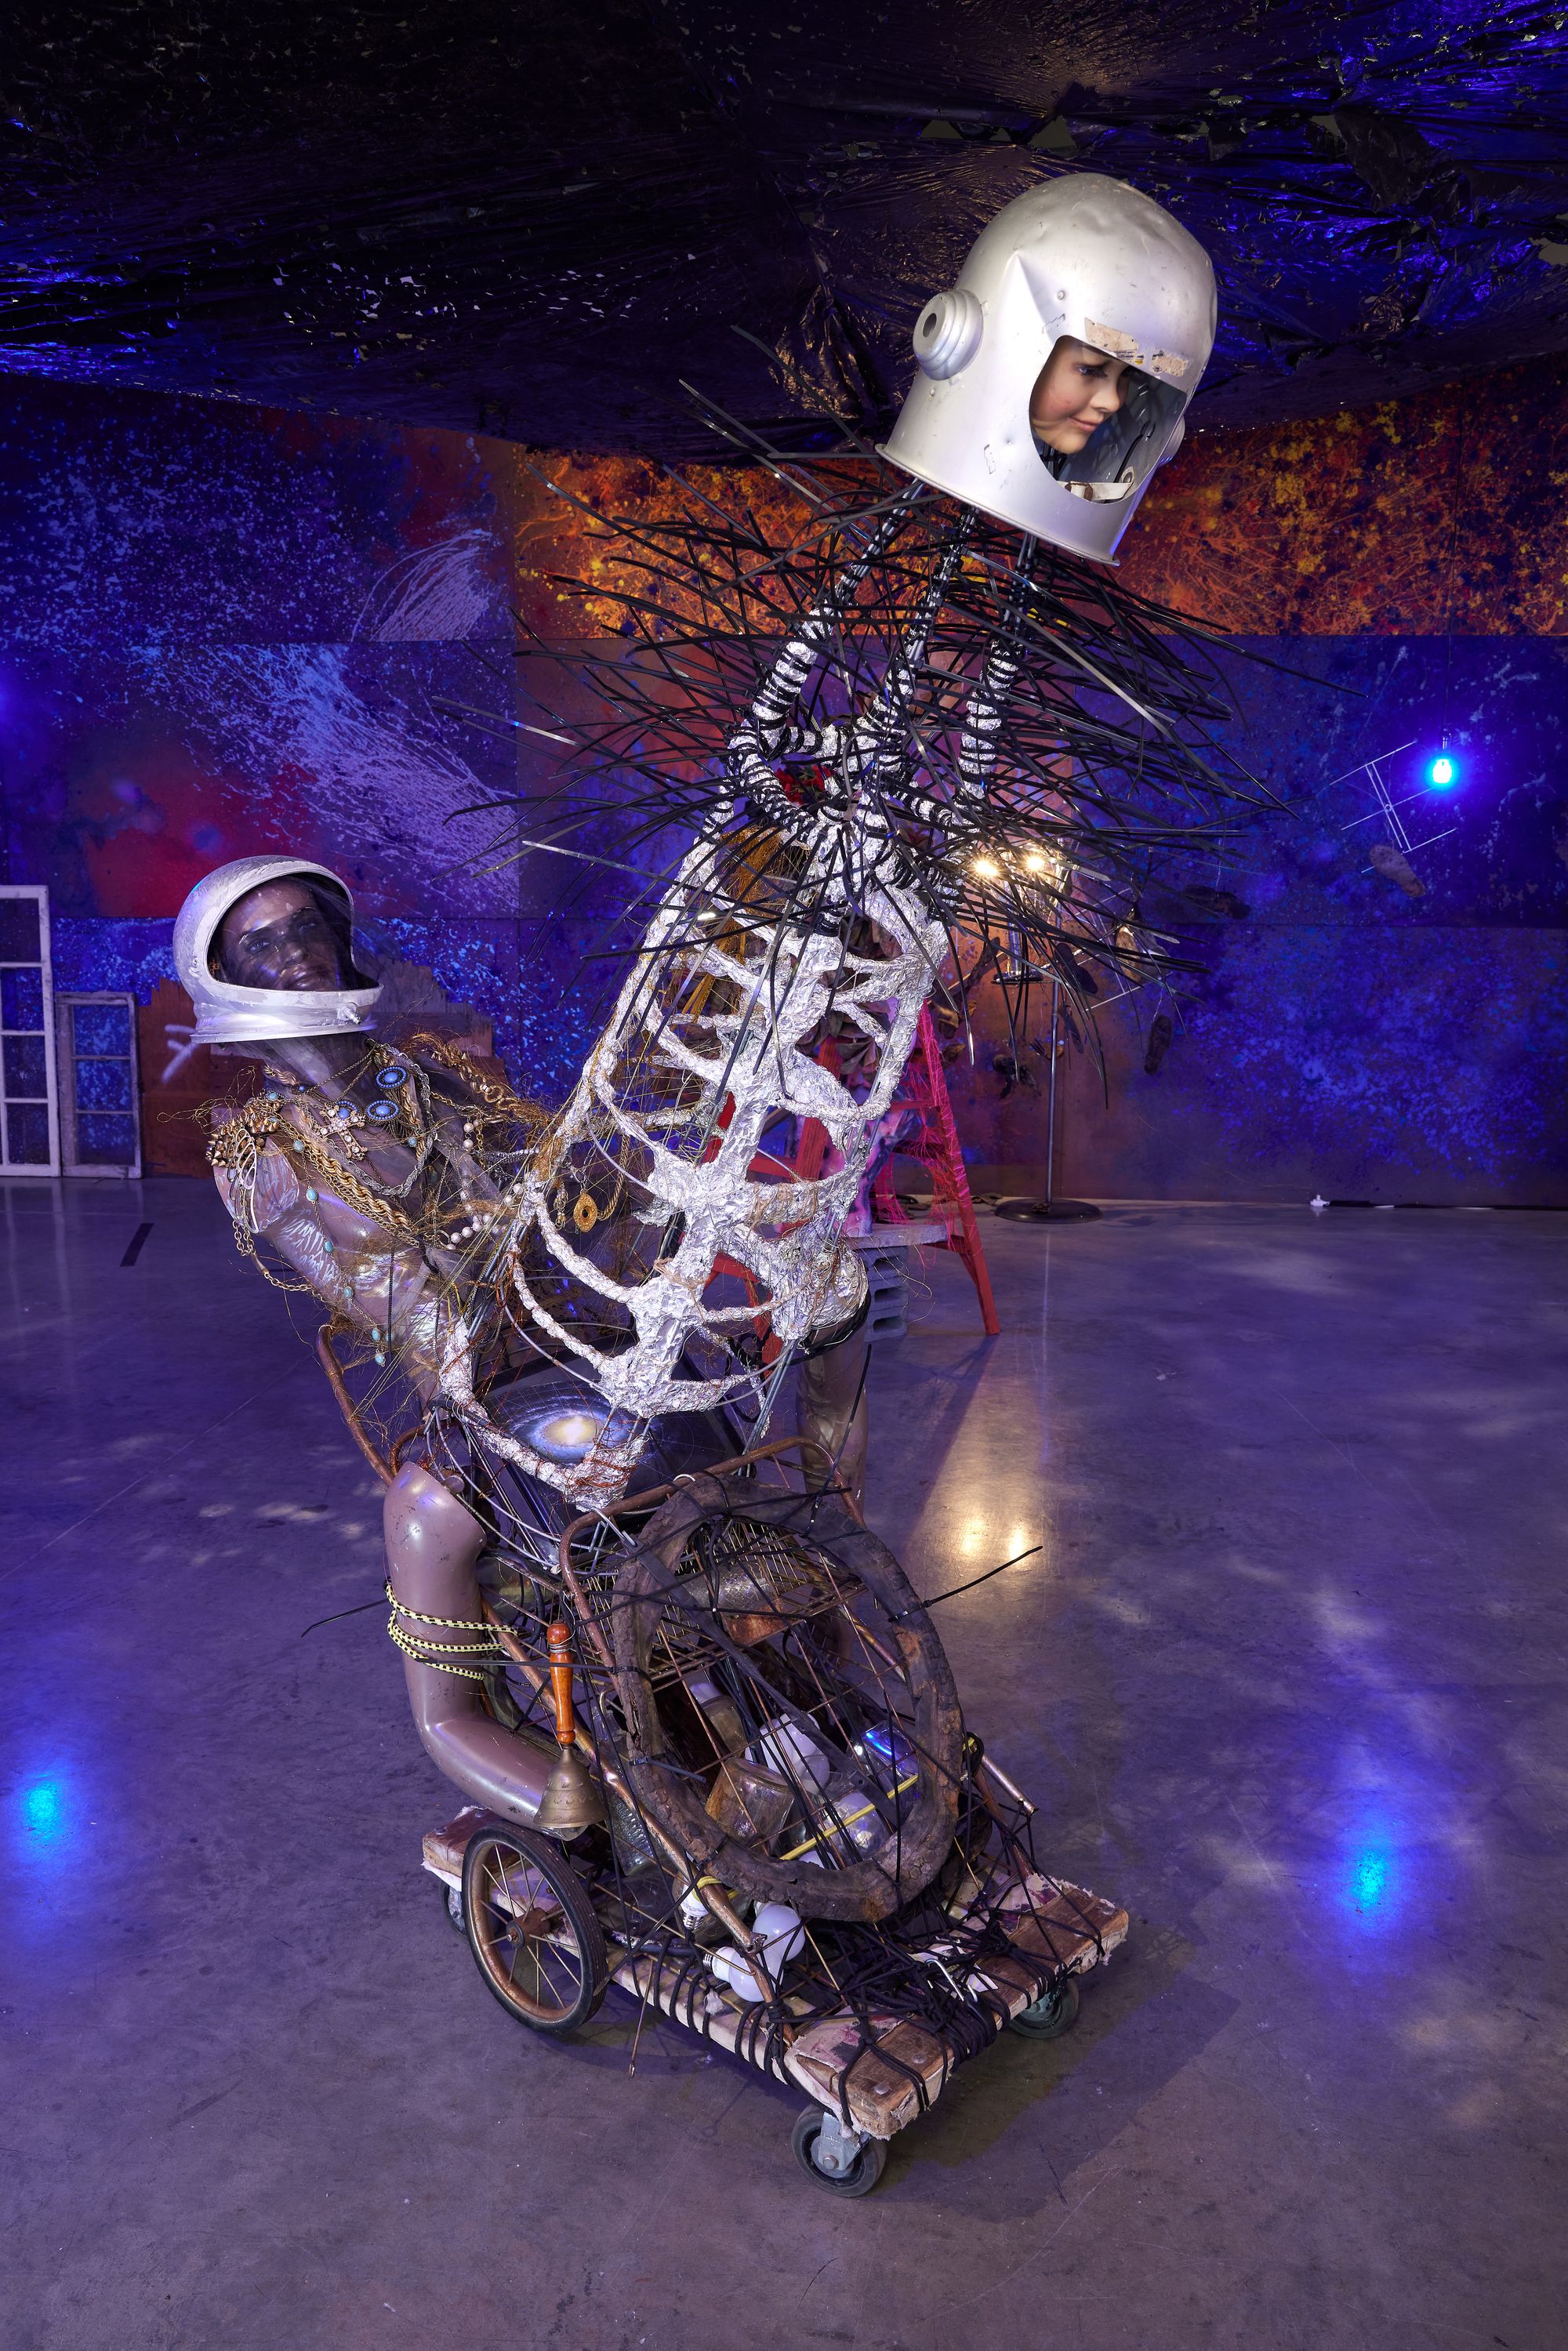 A dinosaur-looking creature assembled from mixed metals and materials, with a mannequins head on top wearing an astronaut's helmet.  